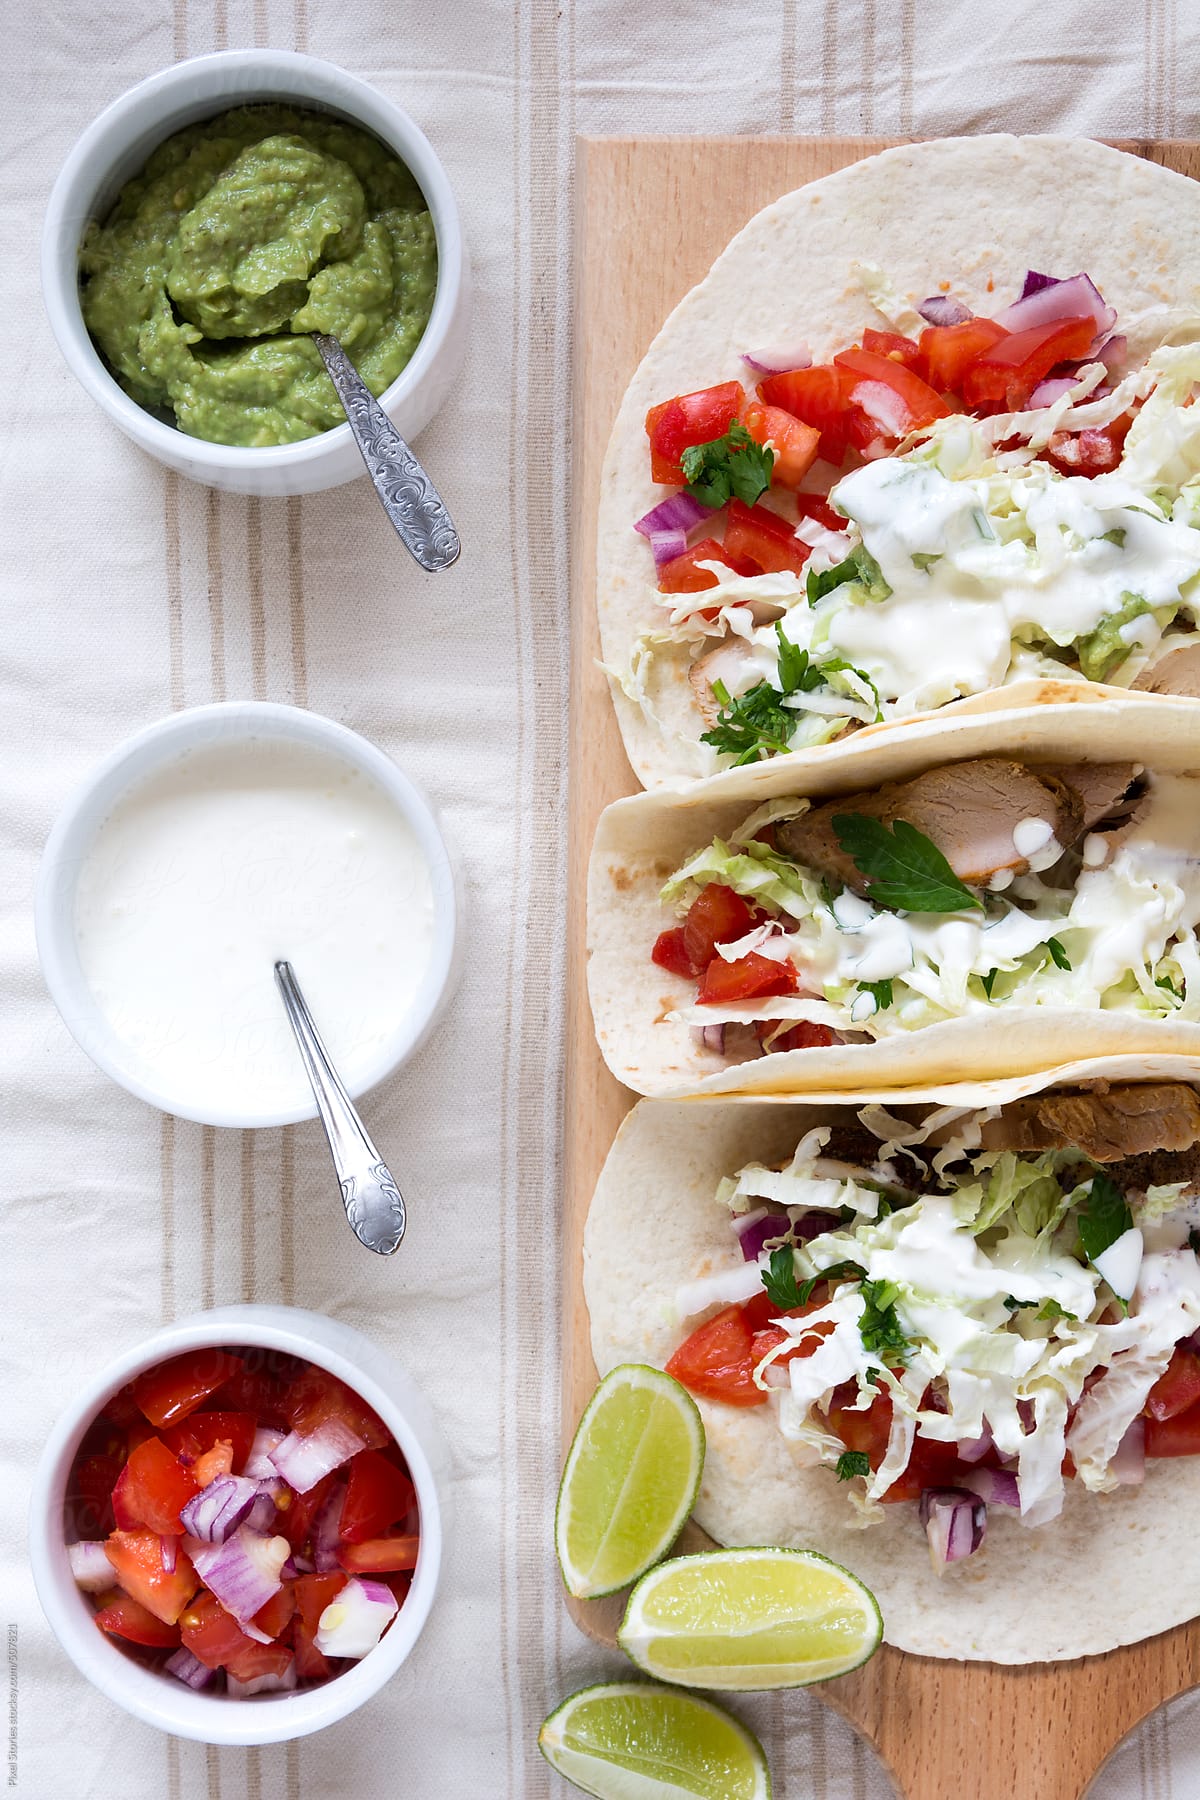 Food: Tacos with roasted chicken, guacamole and vegetables